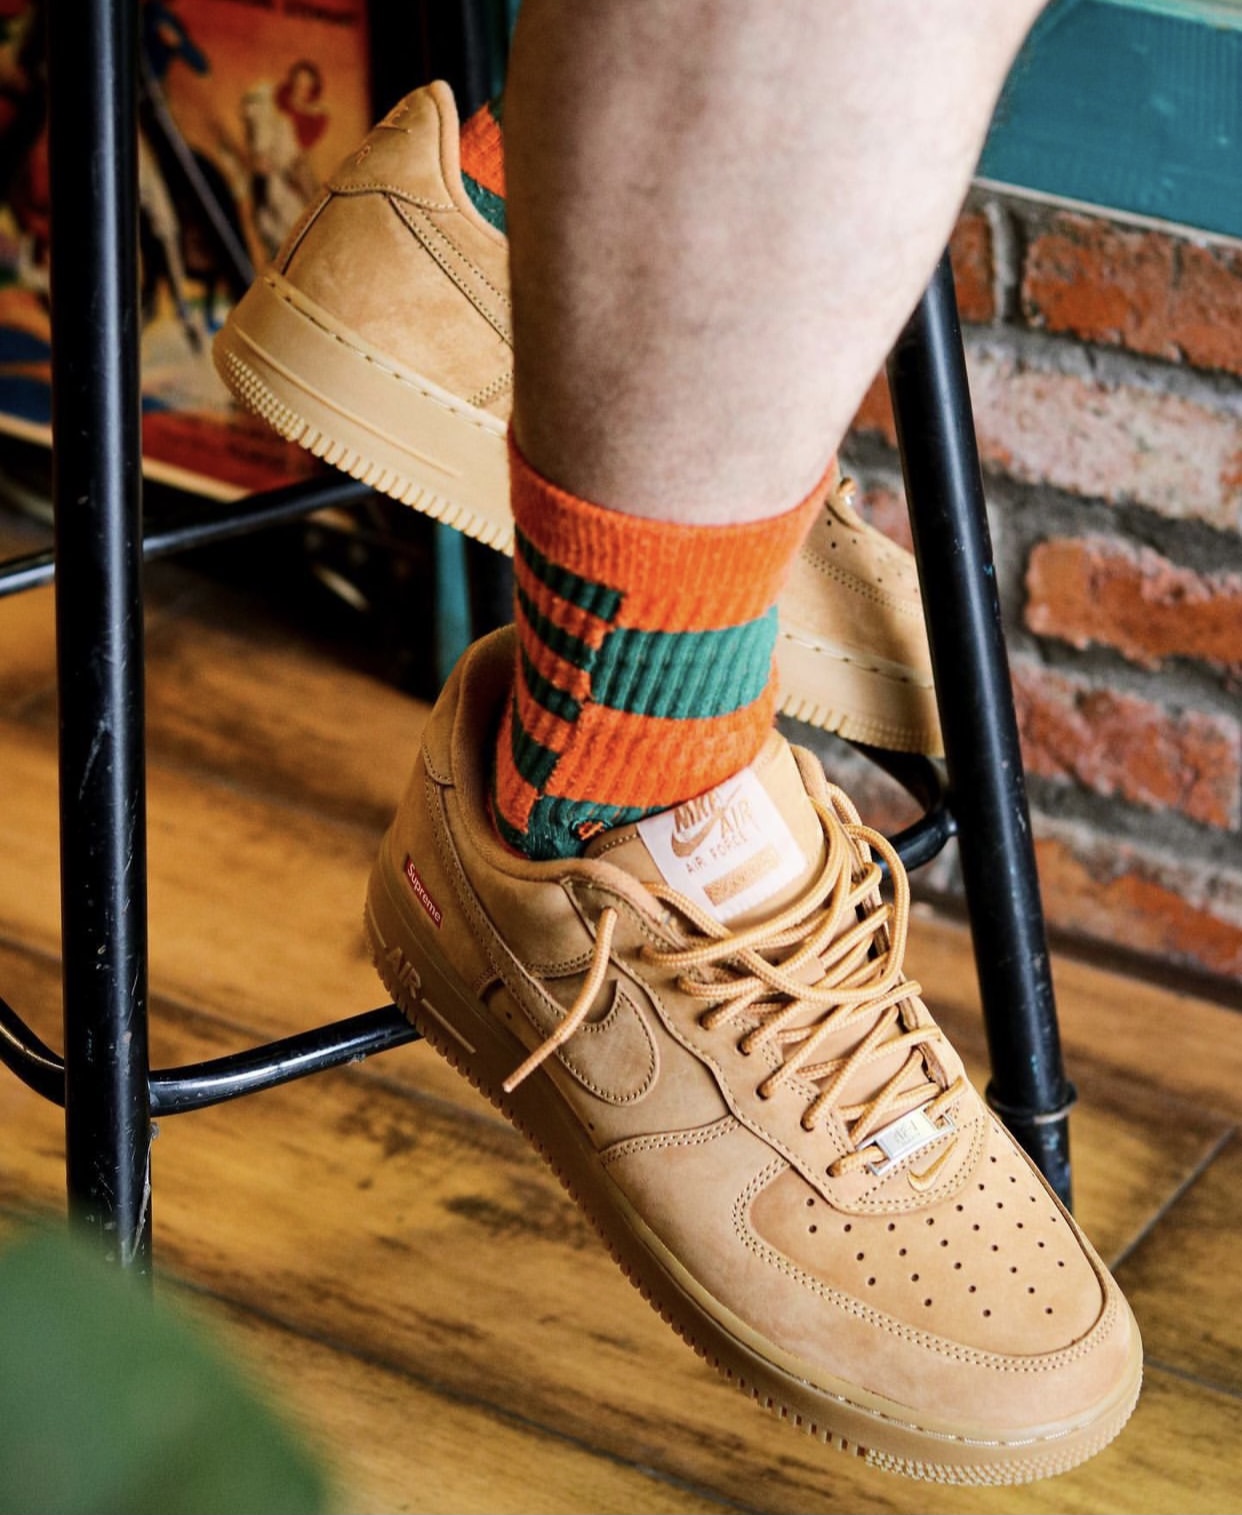 Supreme Nike Air Force 1 Low Flax Release Date - Sneaker Bar Detroit